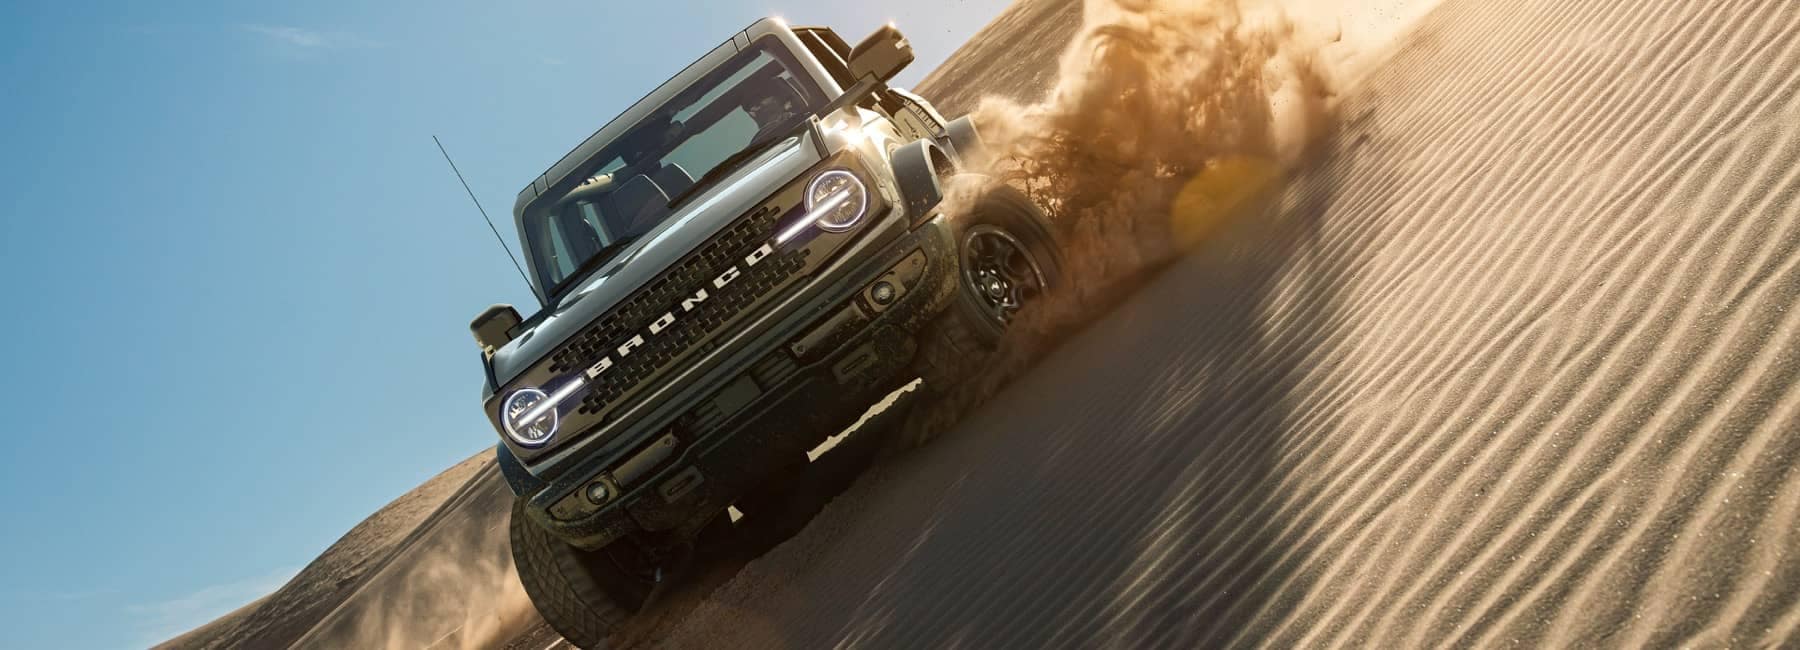 2021 Ford Bronco in Cactus Gray being driven on a sand dune